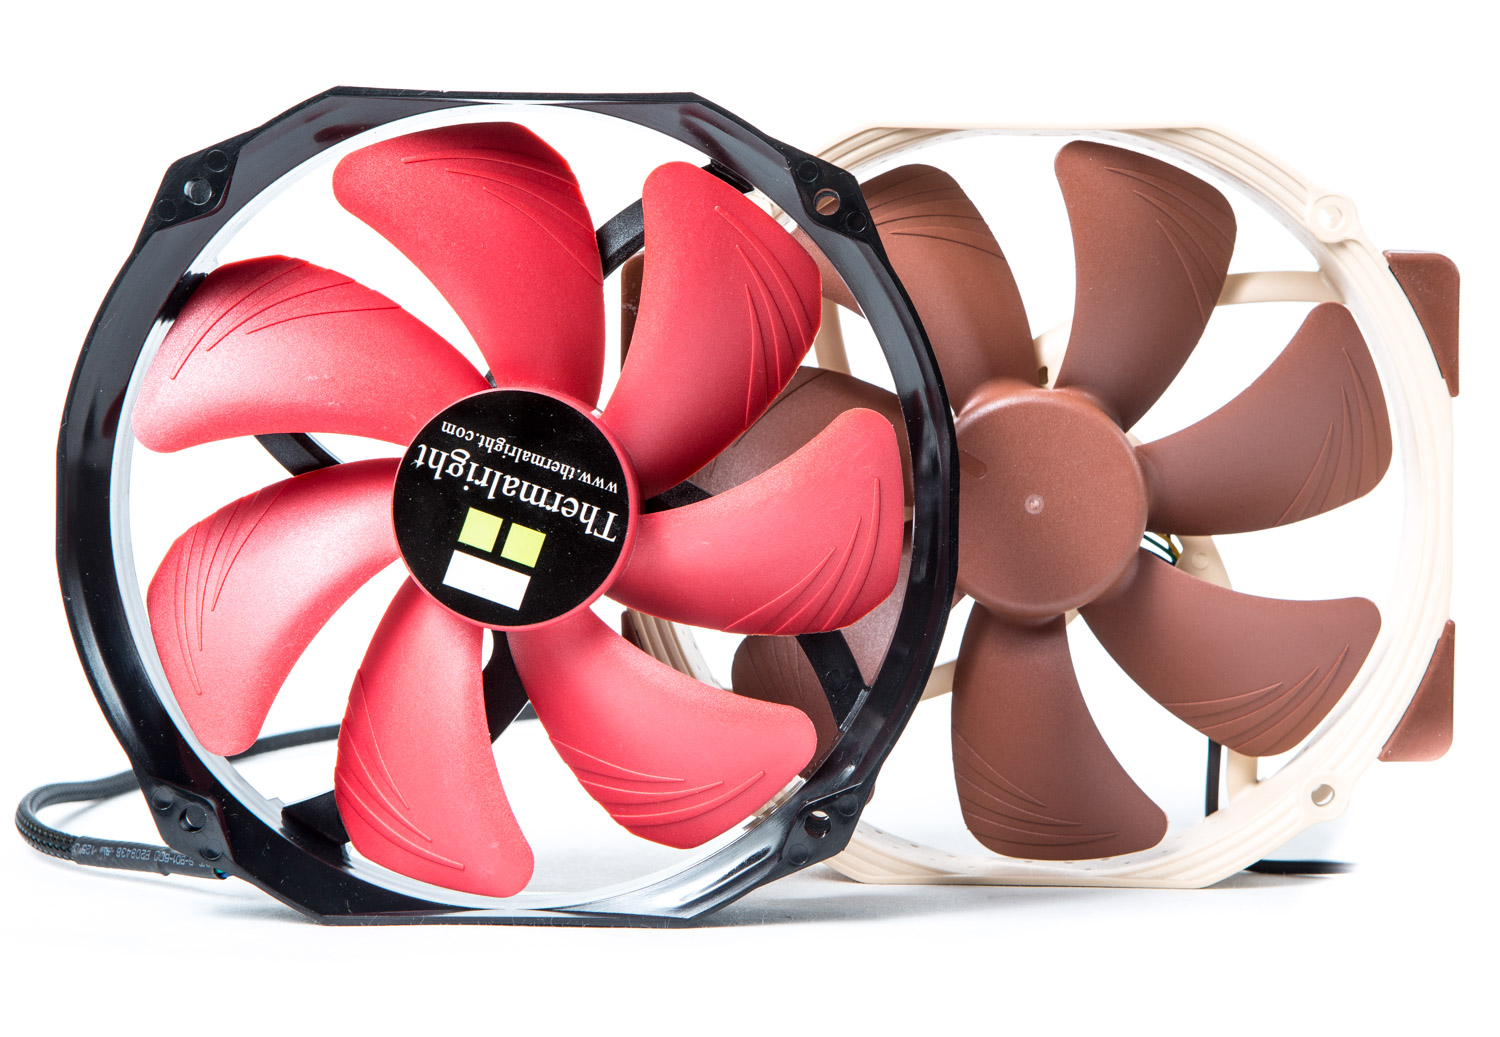 Ranking of the best PC case fans for 2022